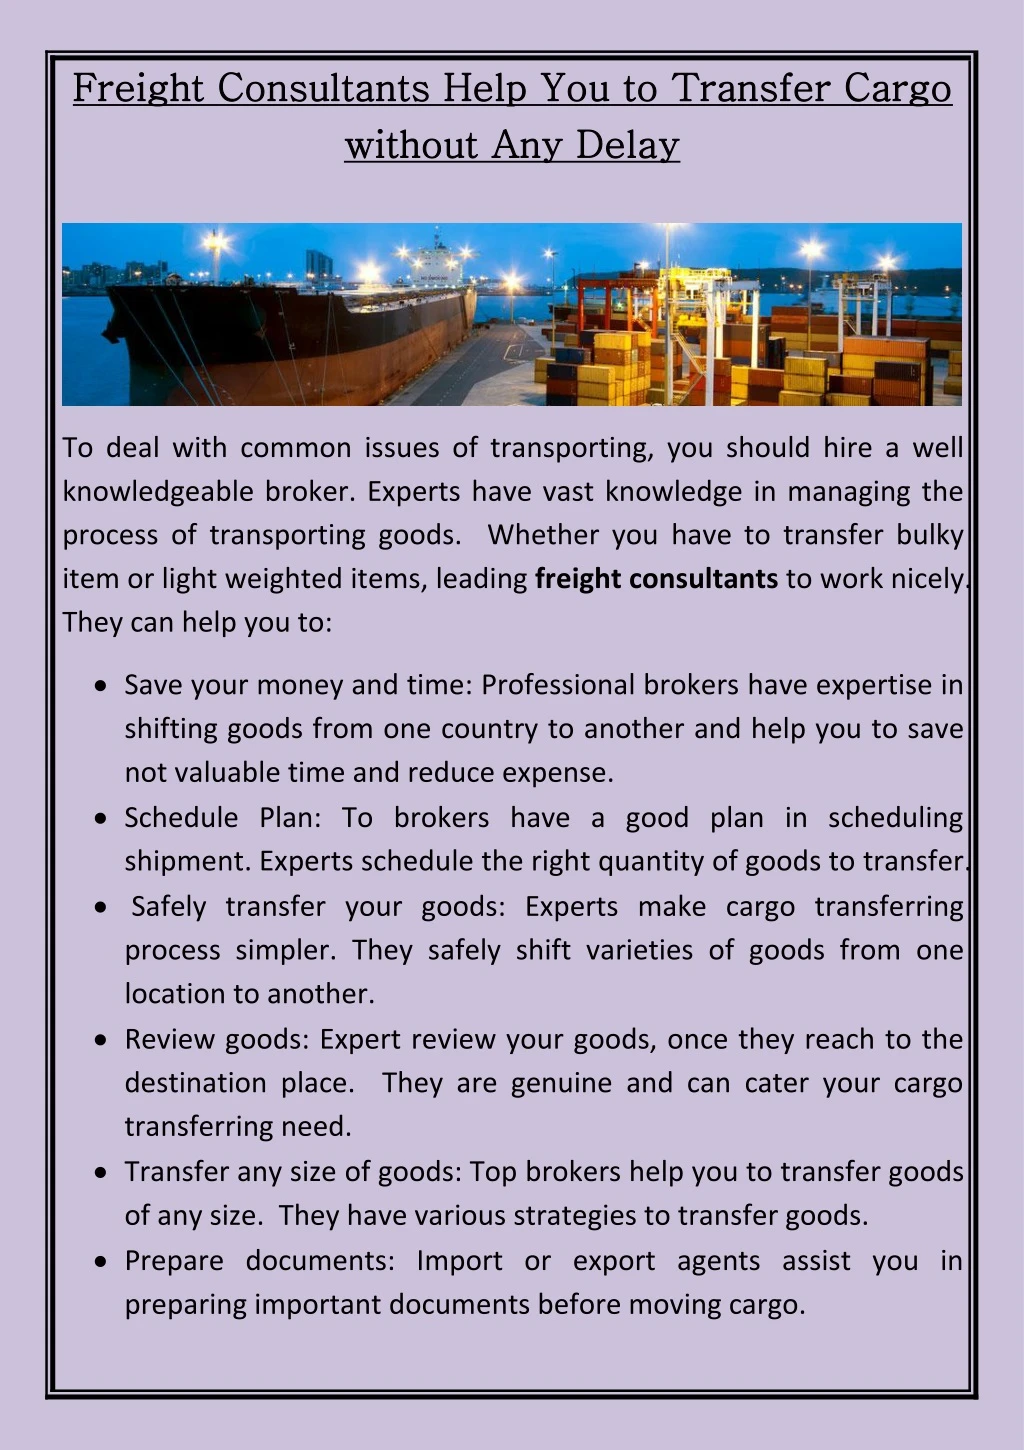 freight freight consultants consultants help